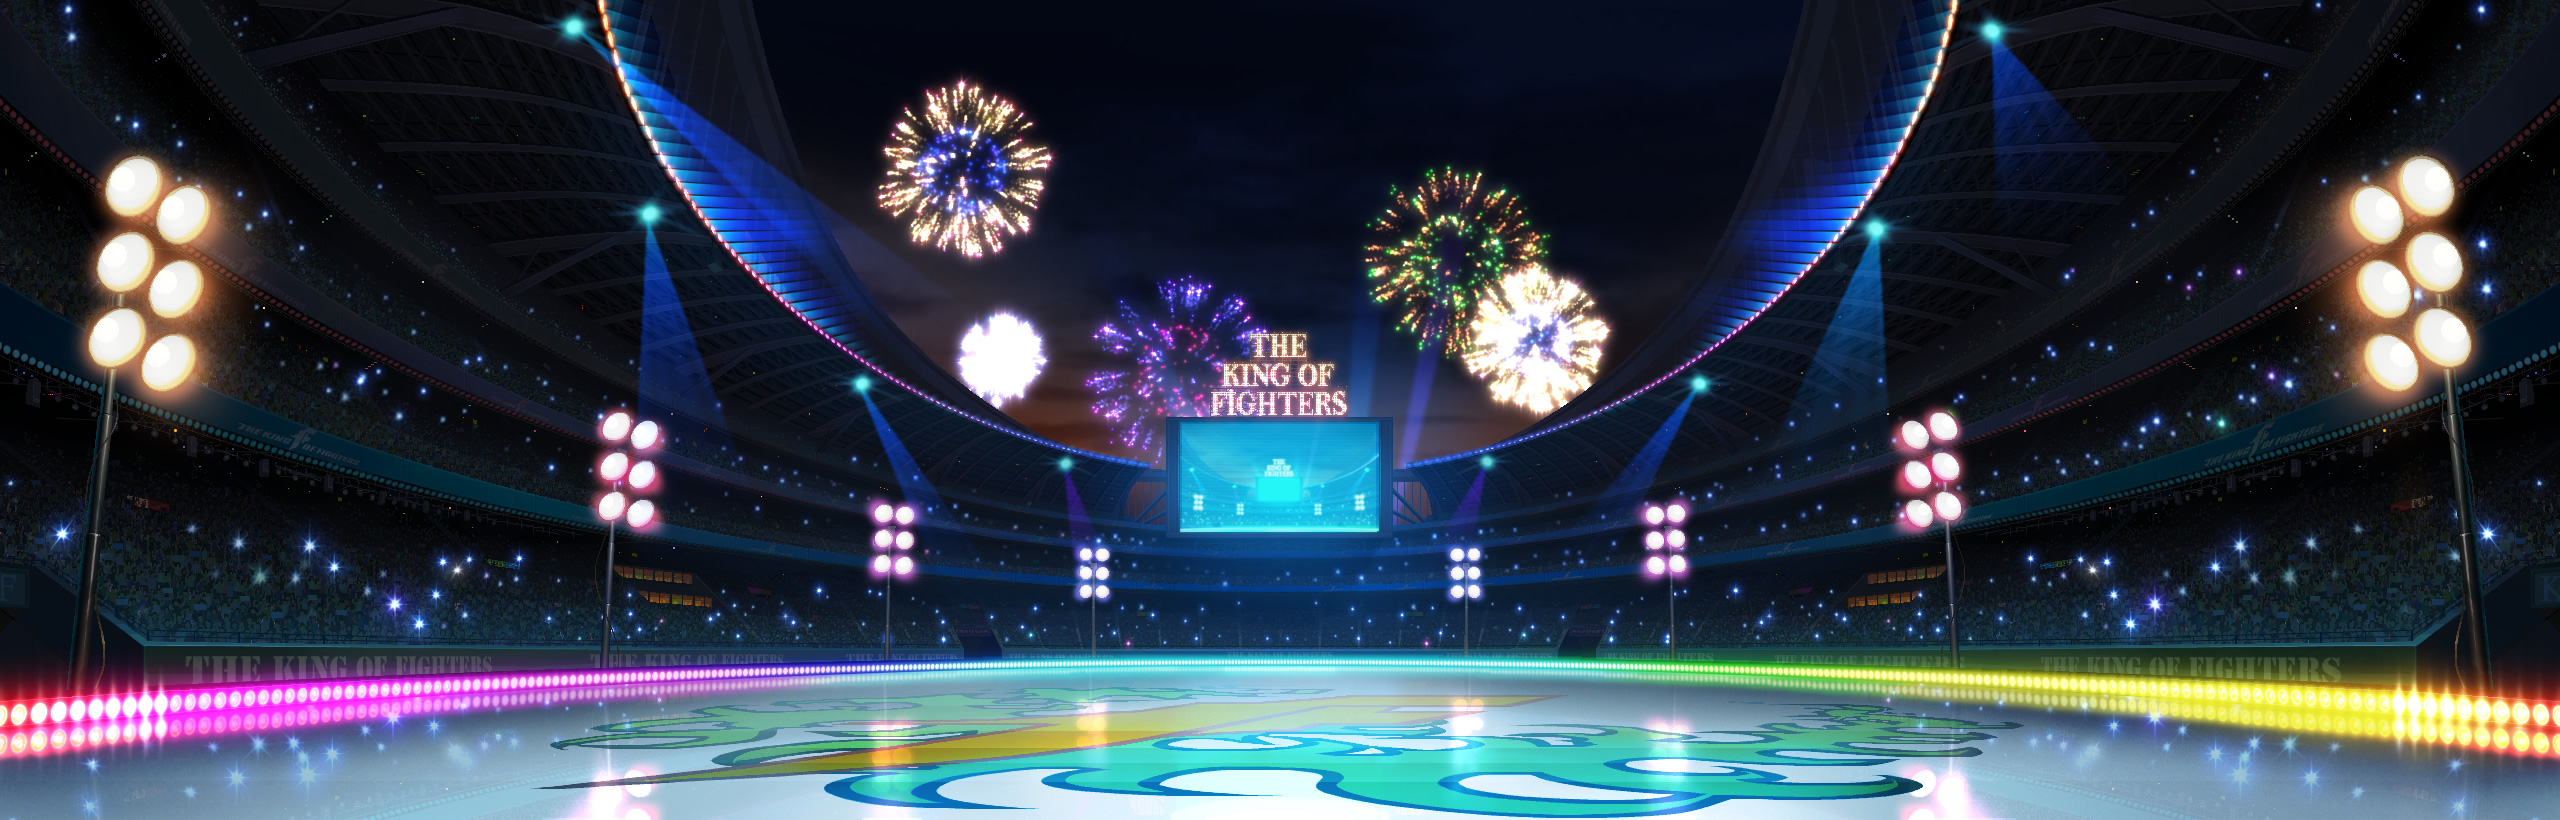 King_of_fighters_XII_stadium_night_stage.jpg